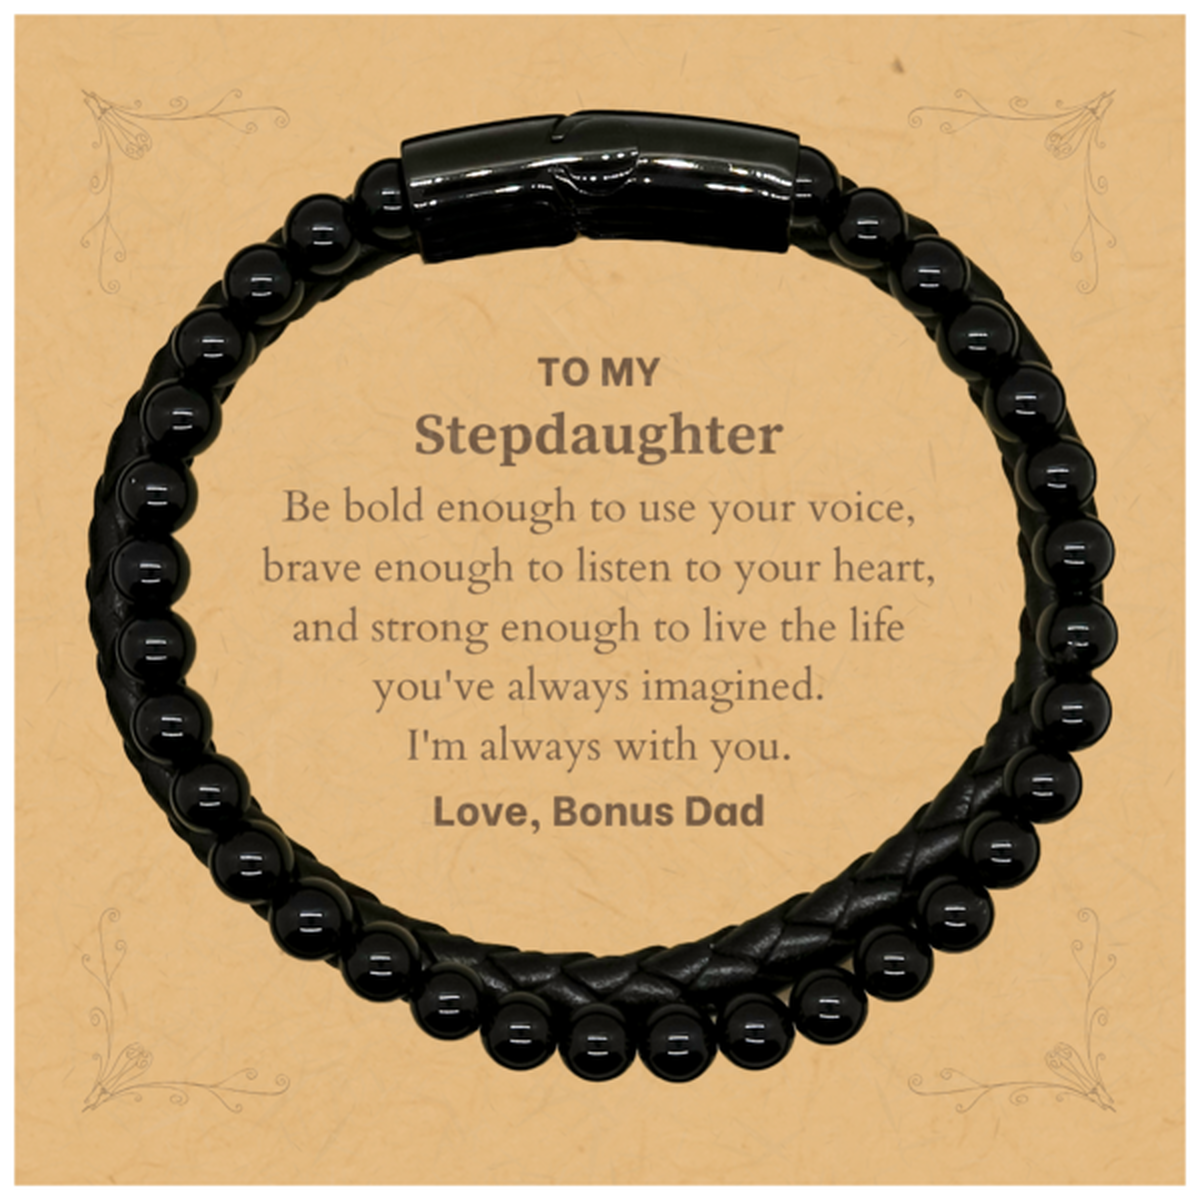 Keepsake Stepdaughter Stone Leather Bracelets Gift Idea Graduation Christmas Birthday Stepdaughter from Bonus Dad, Stepdaughter Be bold enough to use your voice, brave enough to listen to your heart. Love, Bonus Dad